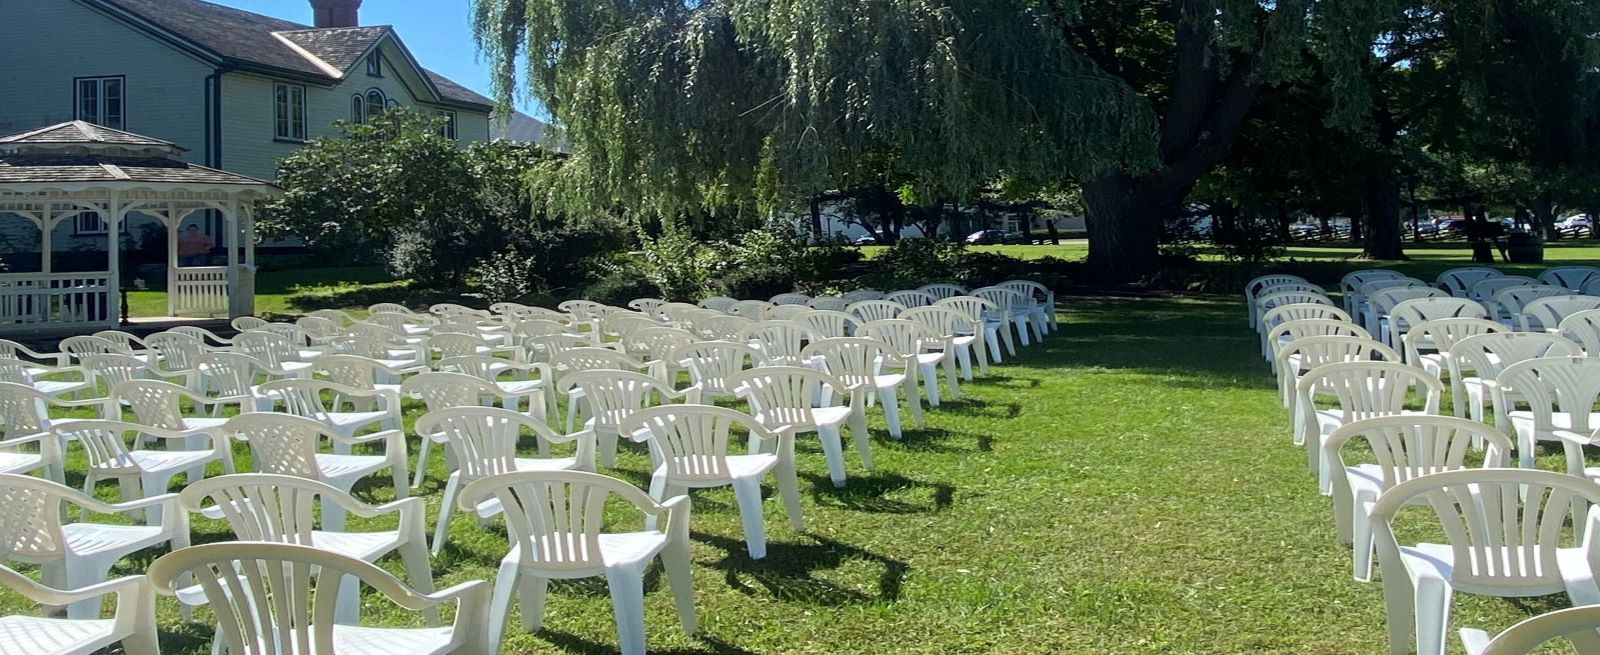 chairs outside set up for a wedding 